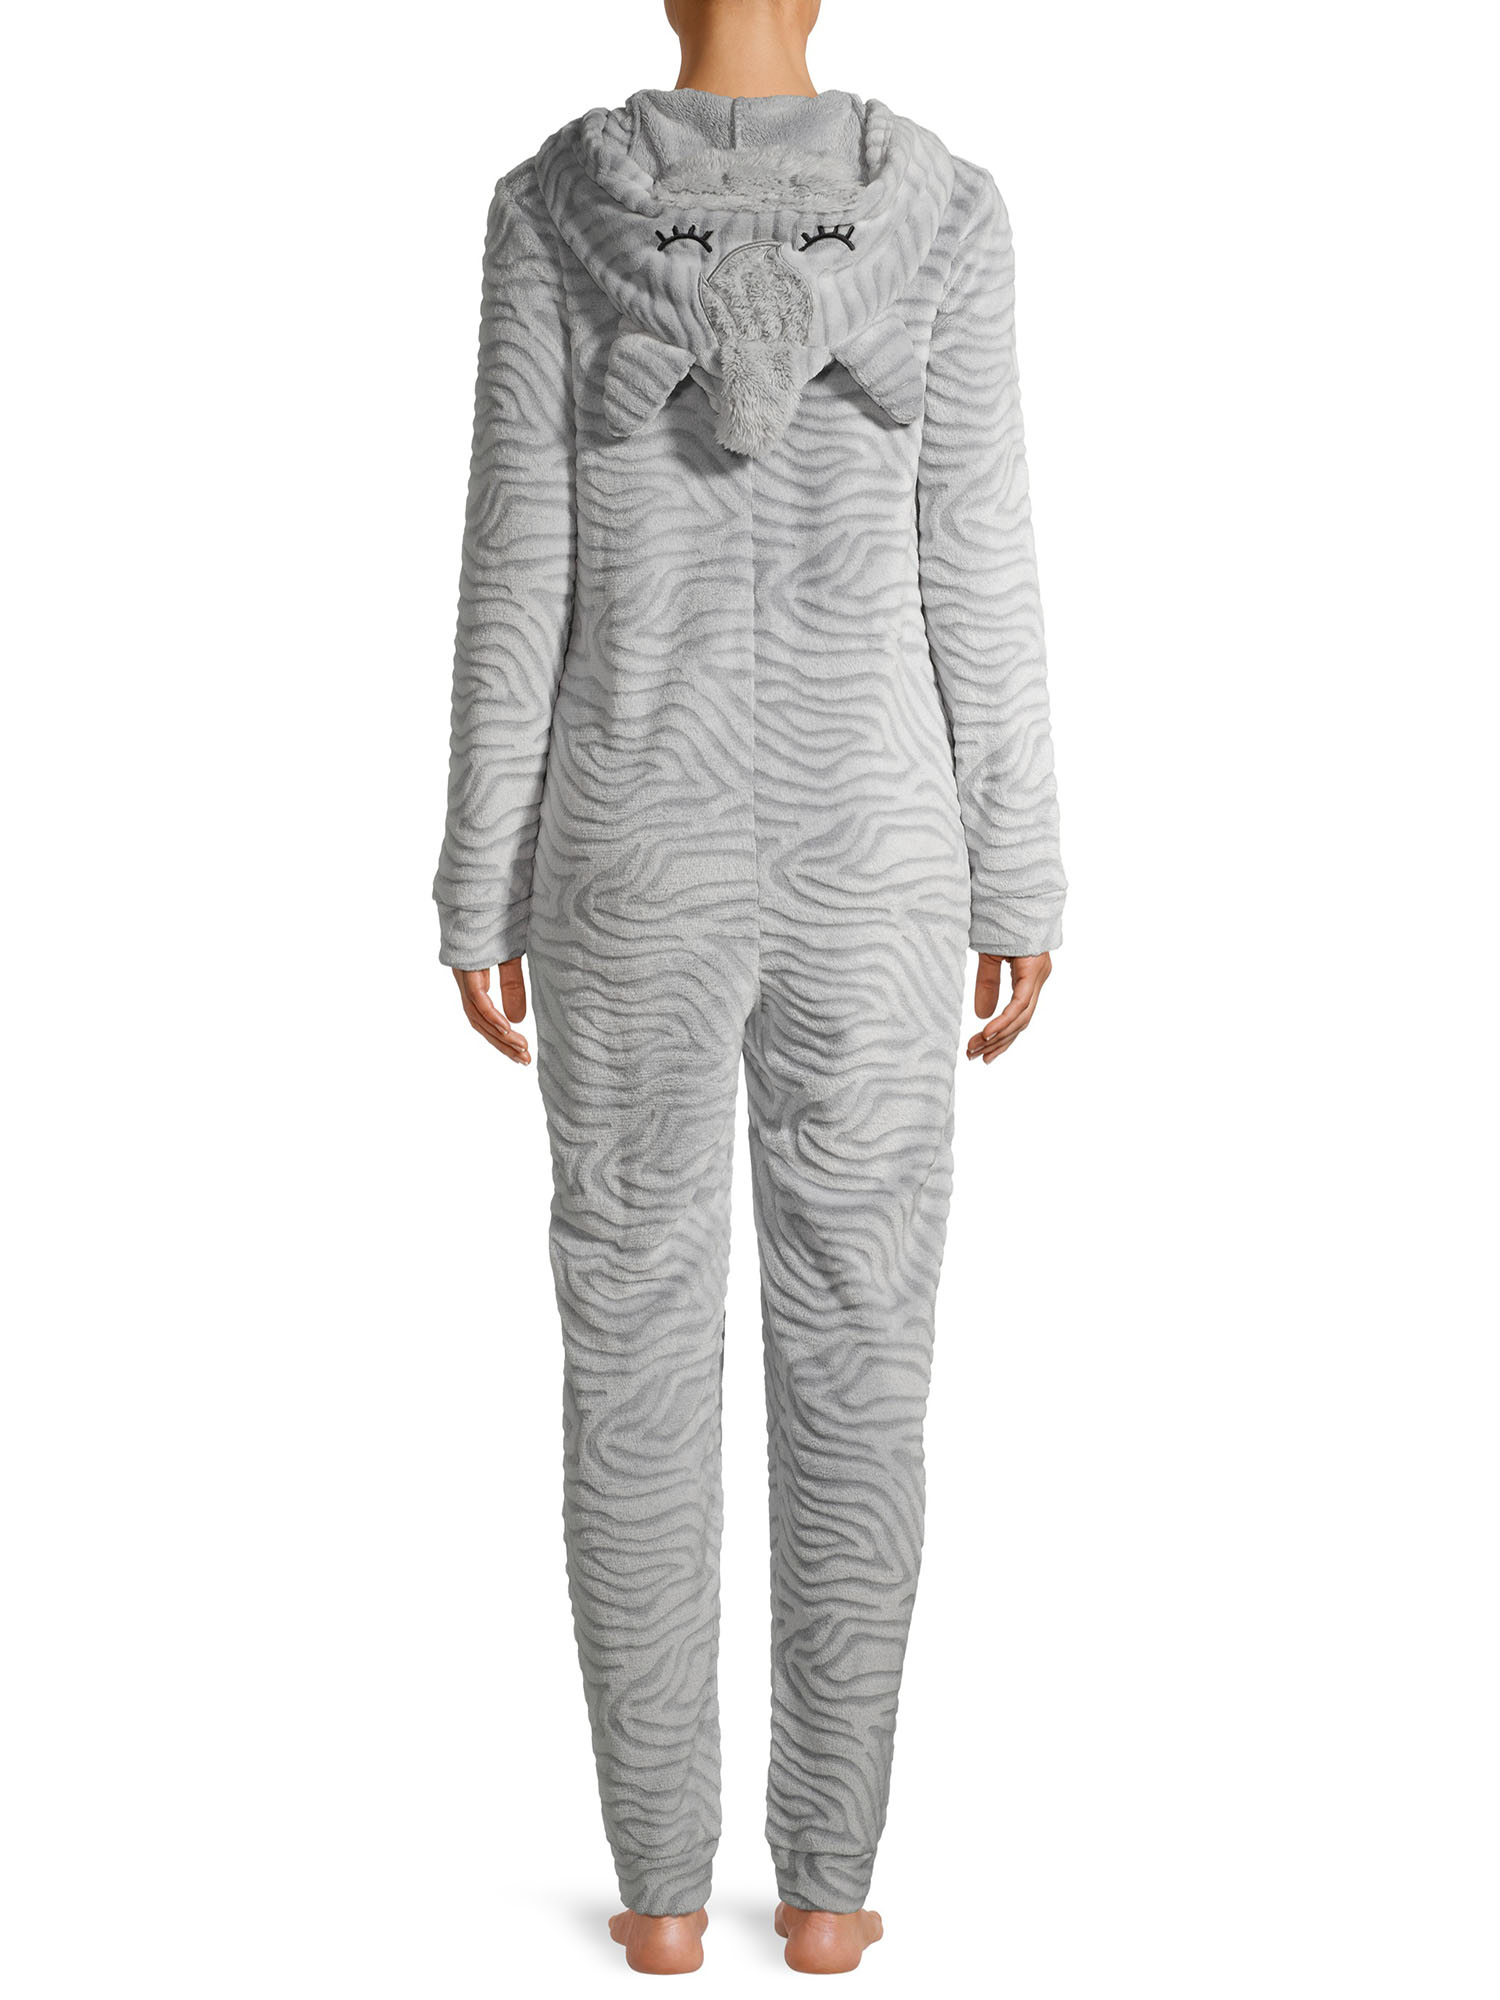 George Women's Character Pajama Union Suit - image 3 of 6